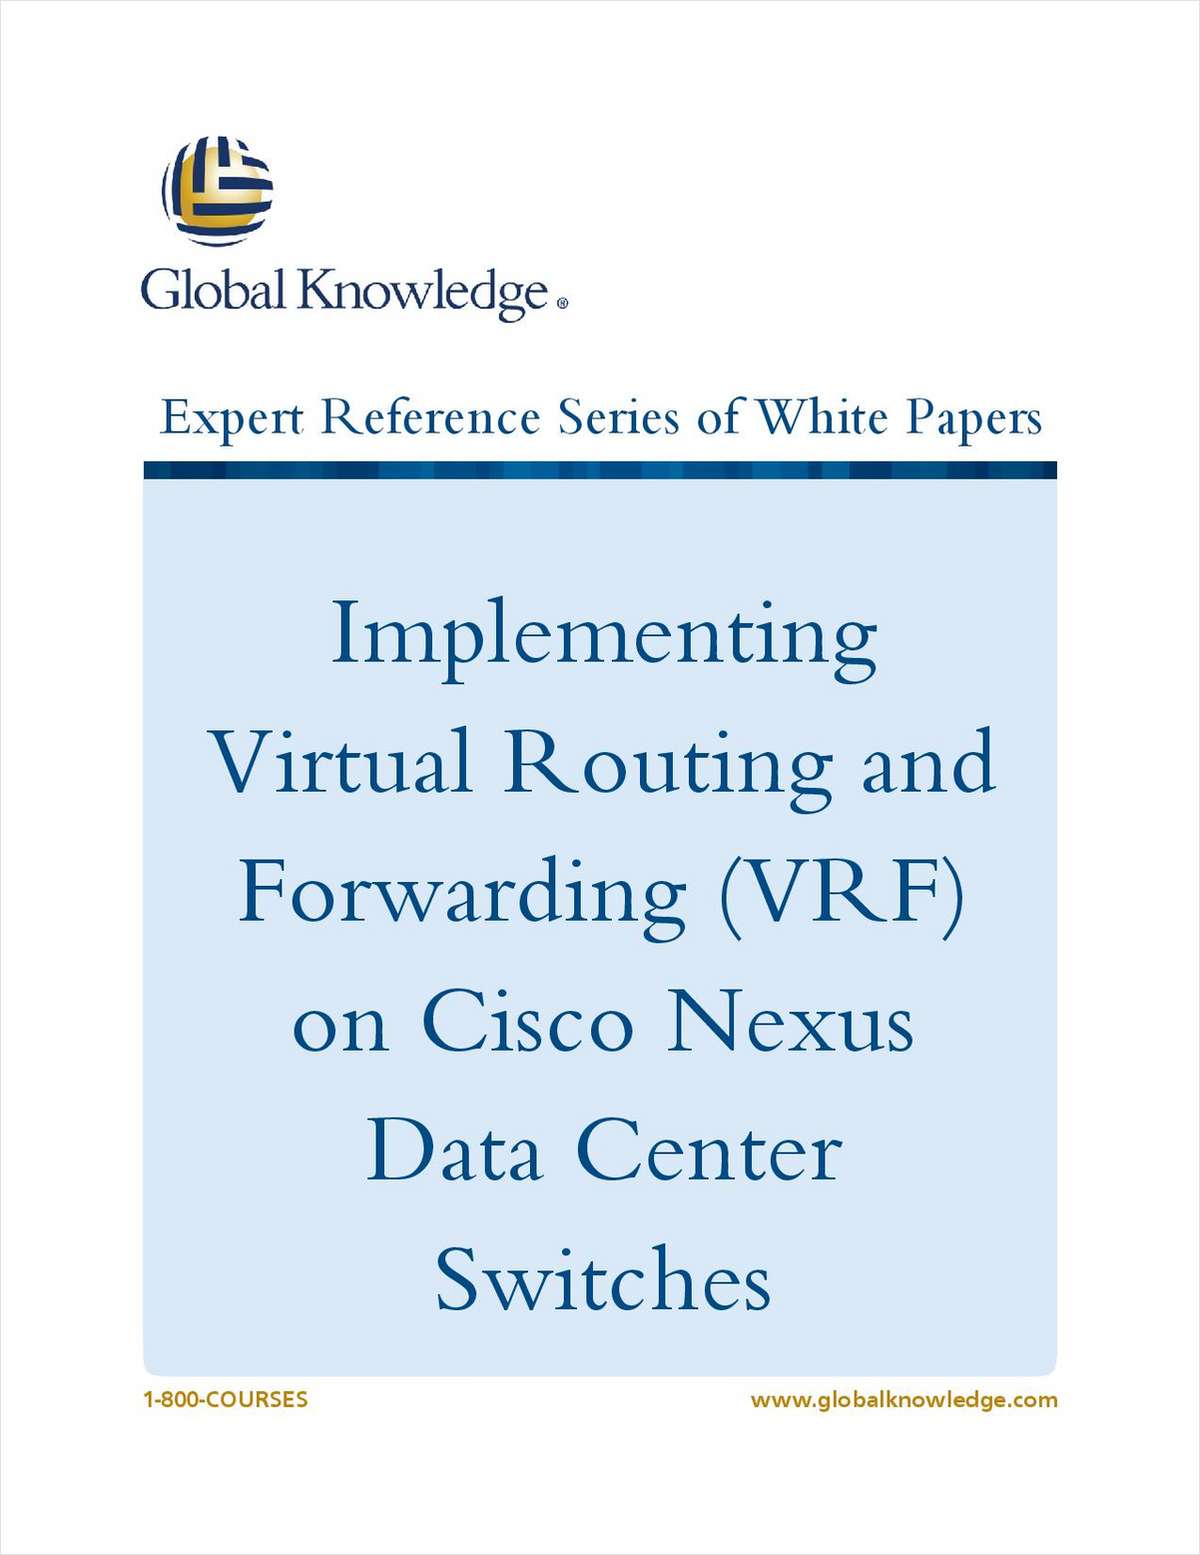 Implementing Virtual Routing and Forwarding (VRF) on Cisco Nexus Data Center Switches